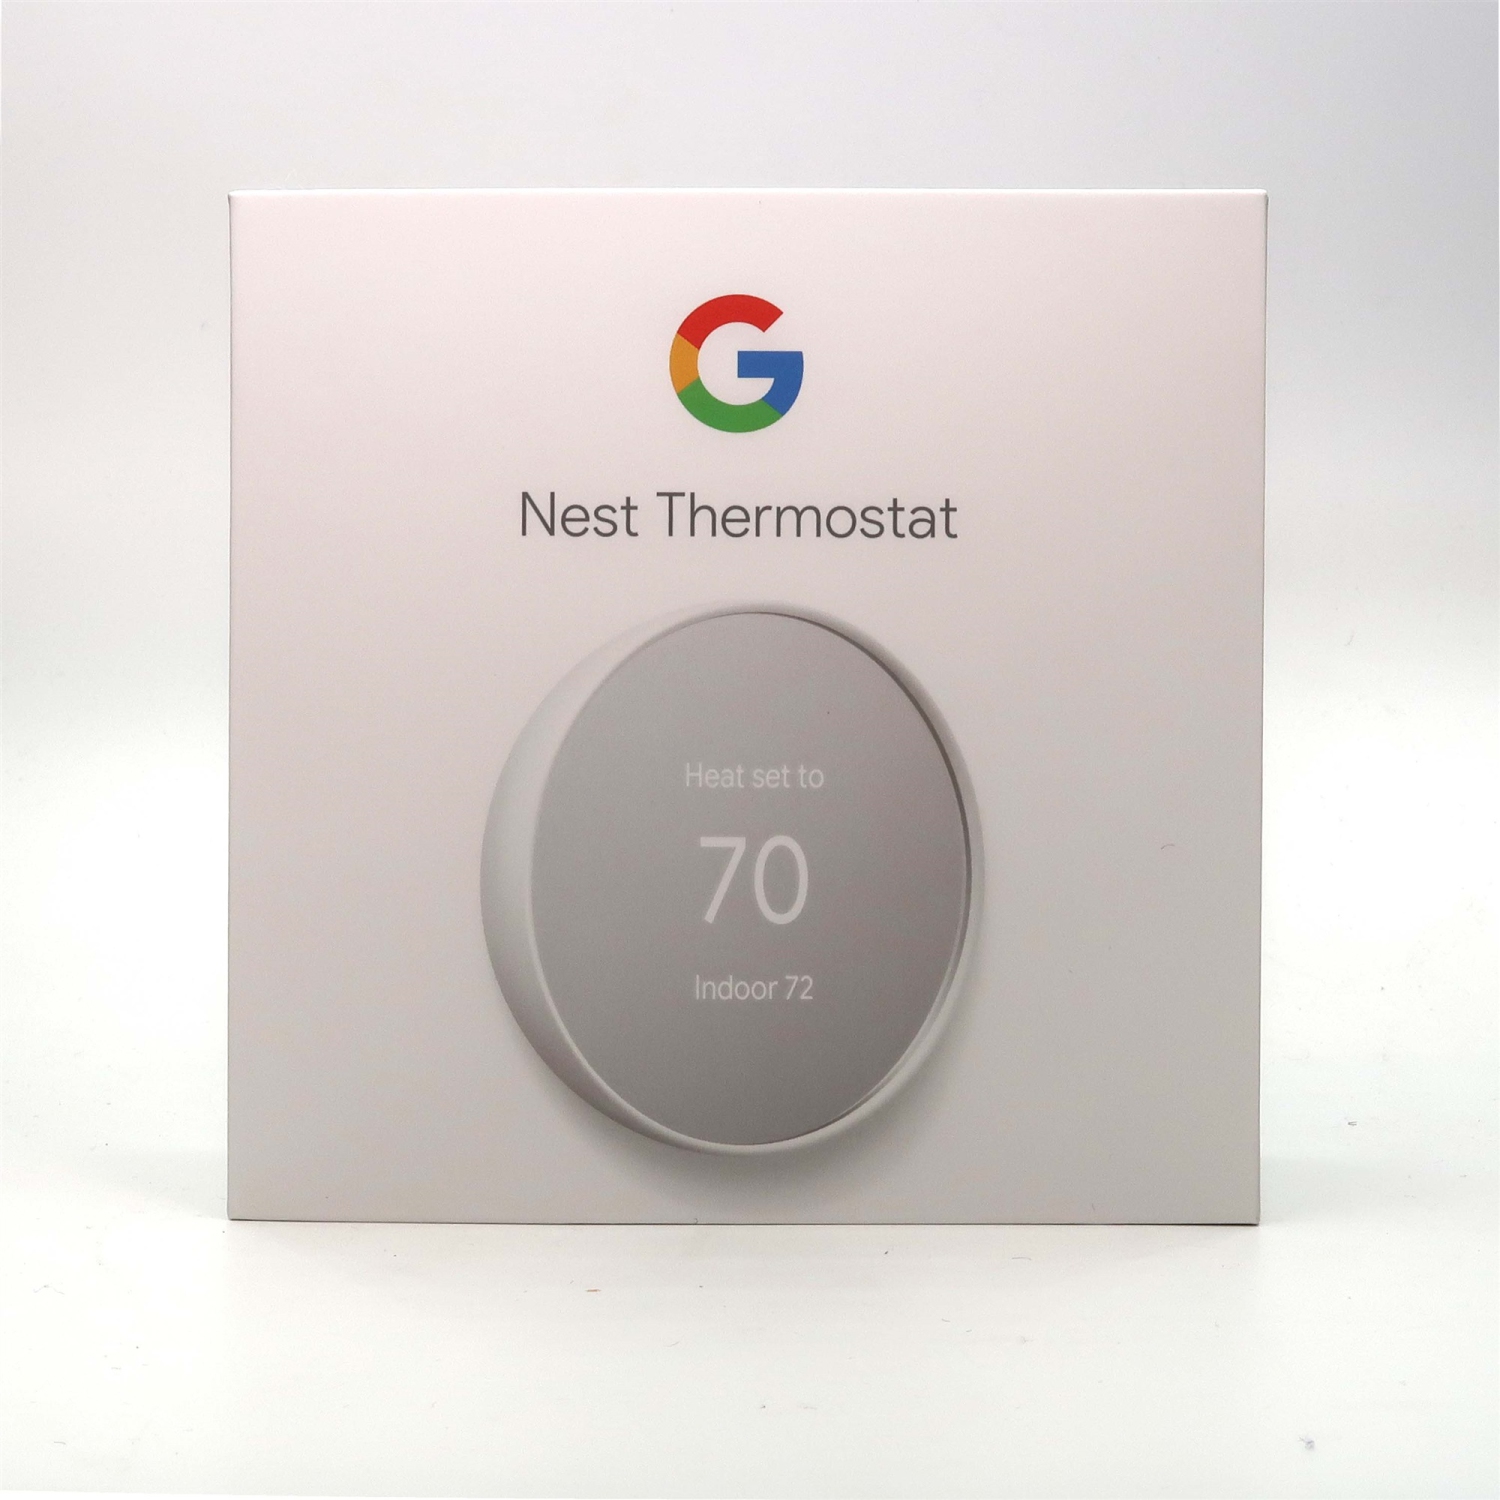 3 Units Google Nest Smart Programmable Wifi Thermostat for Home - Snow - Open Box